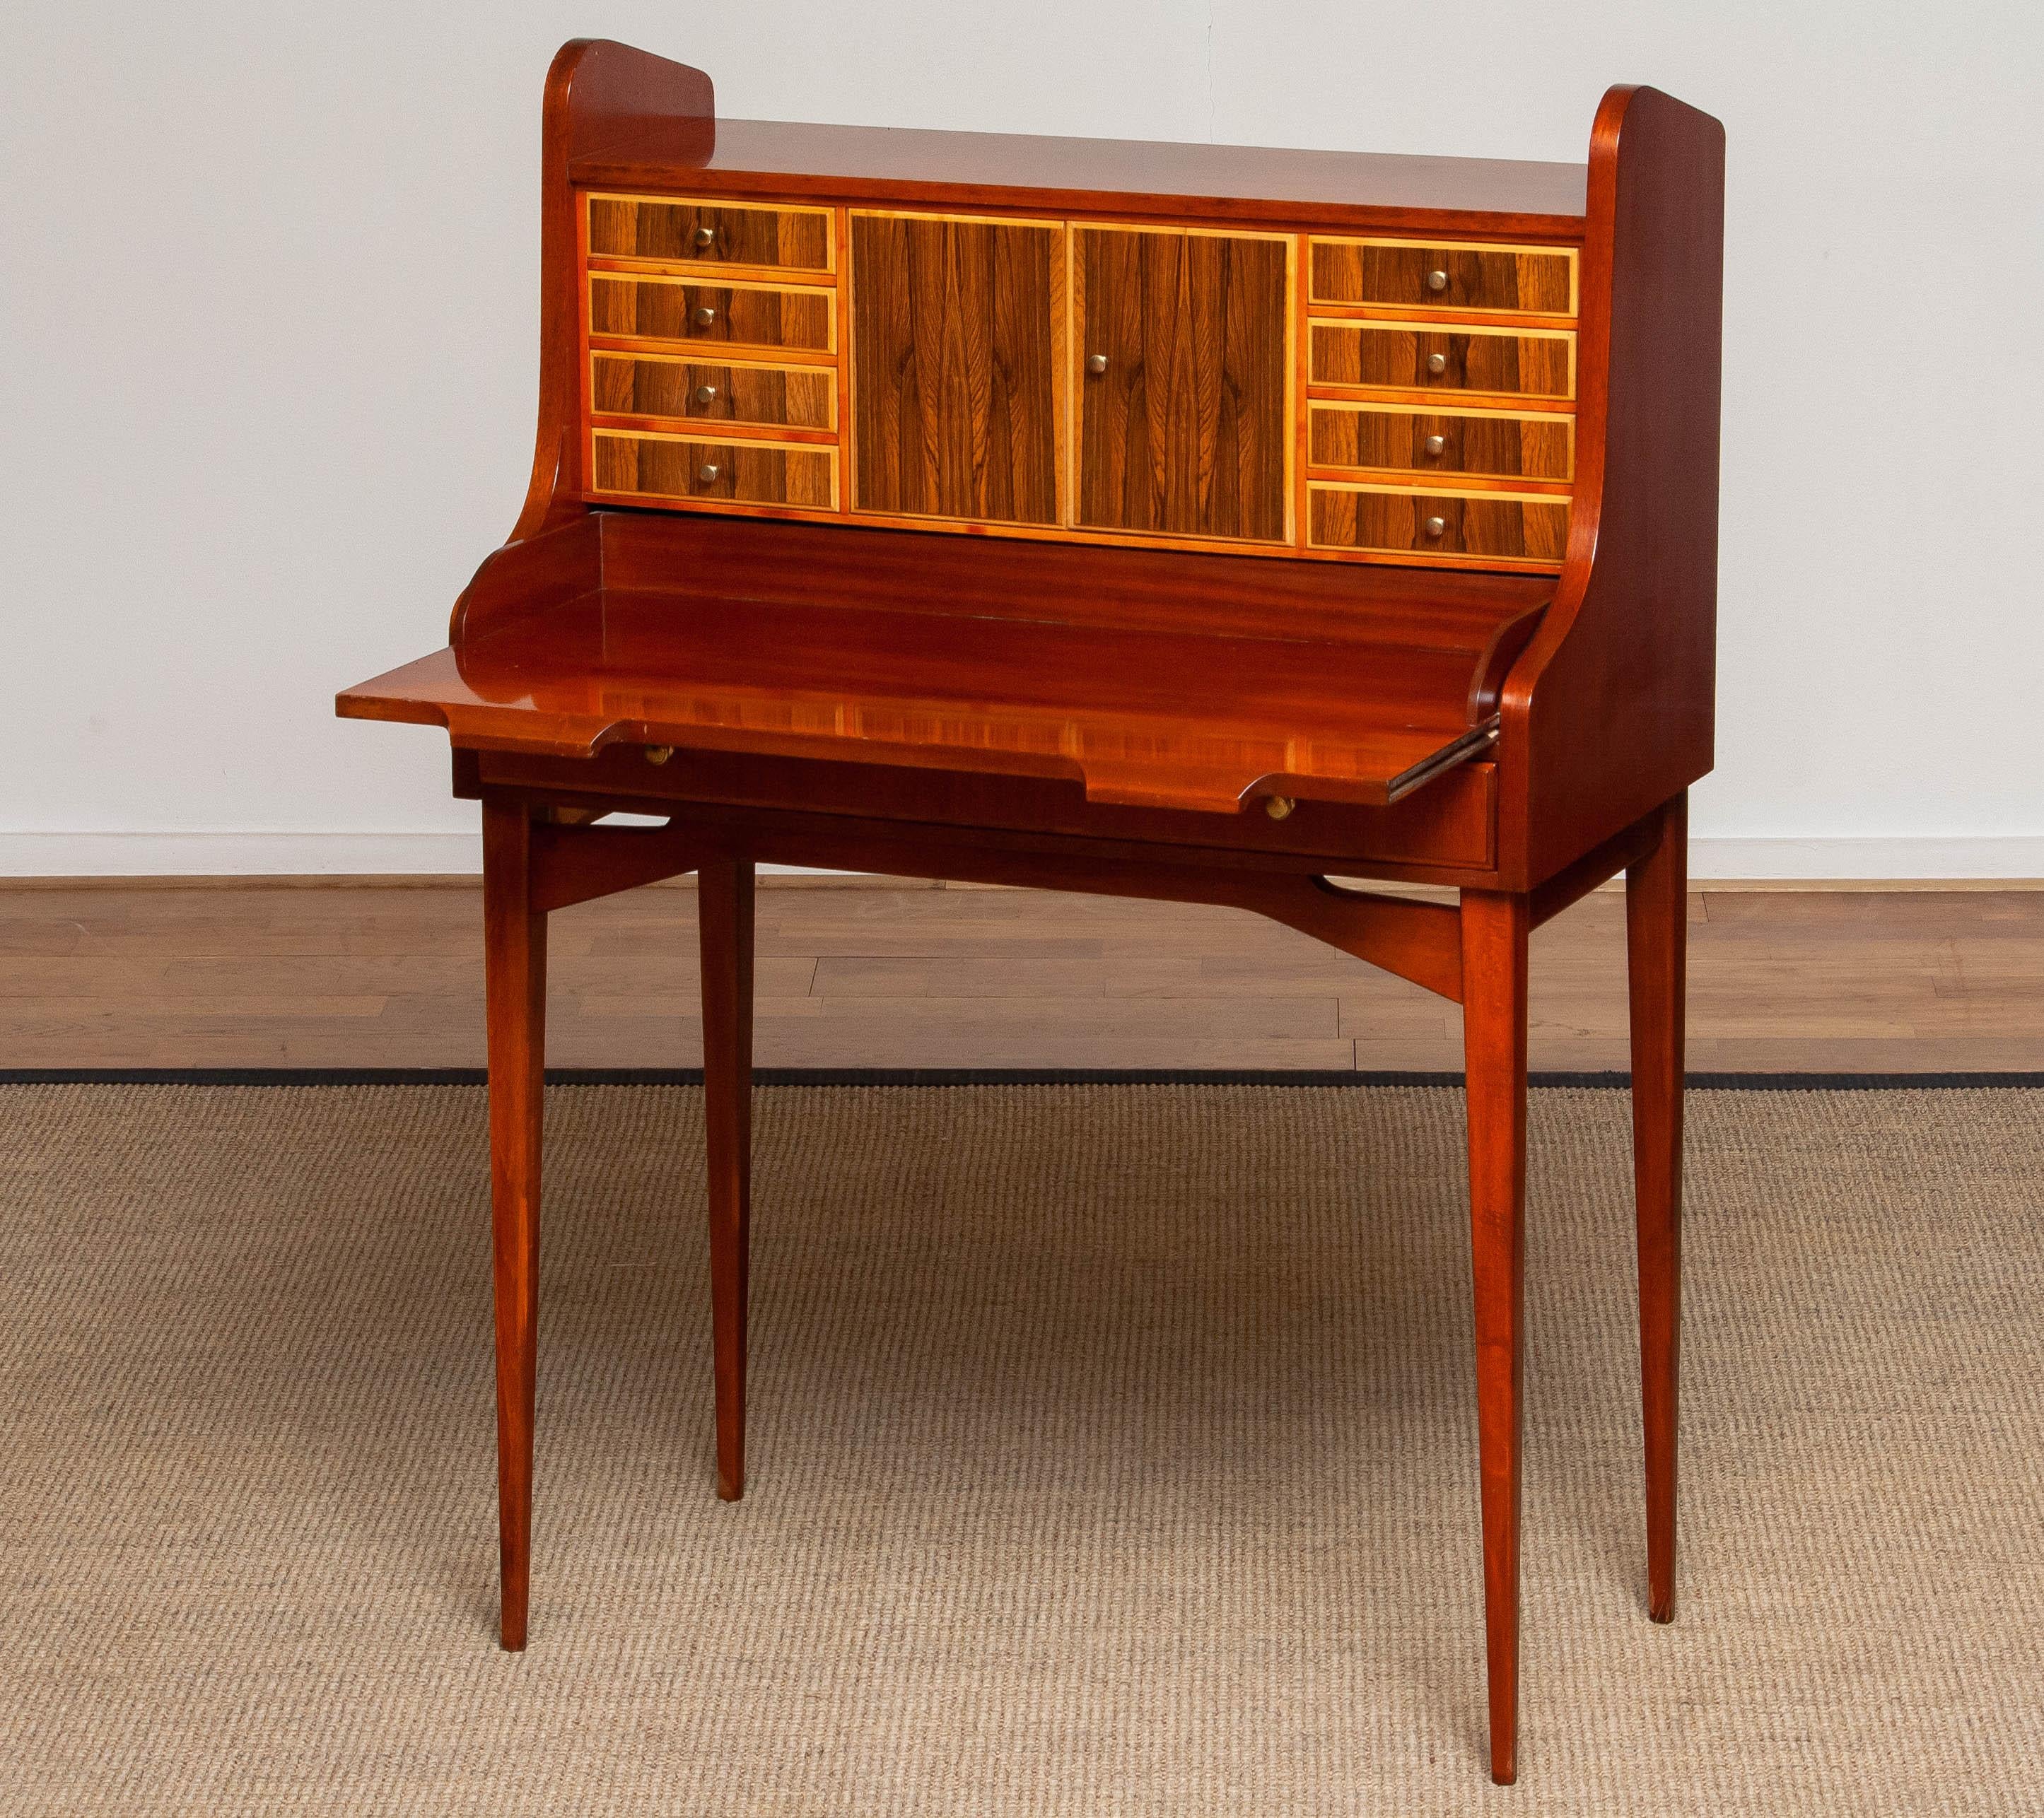 Mid-20th Century '60s Slim Leg Secrétaire / Vanity with Inlay of Elm and Walnut, Sweden For Sale